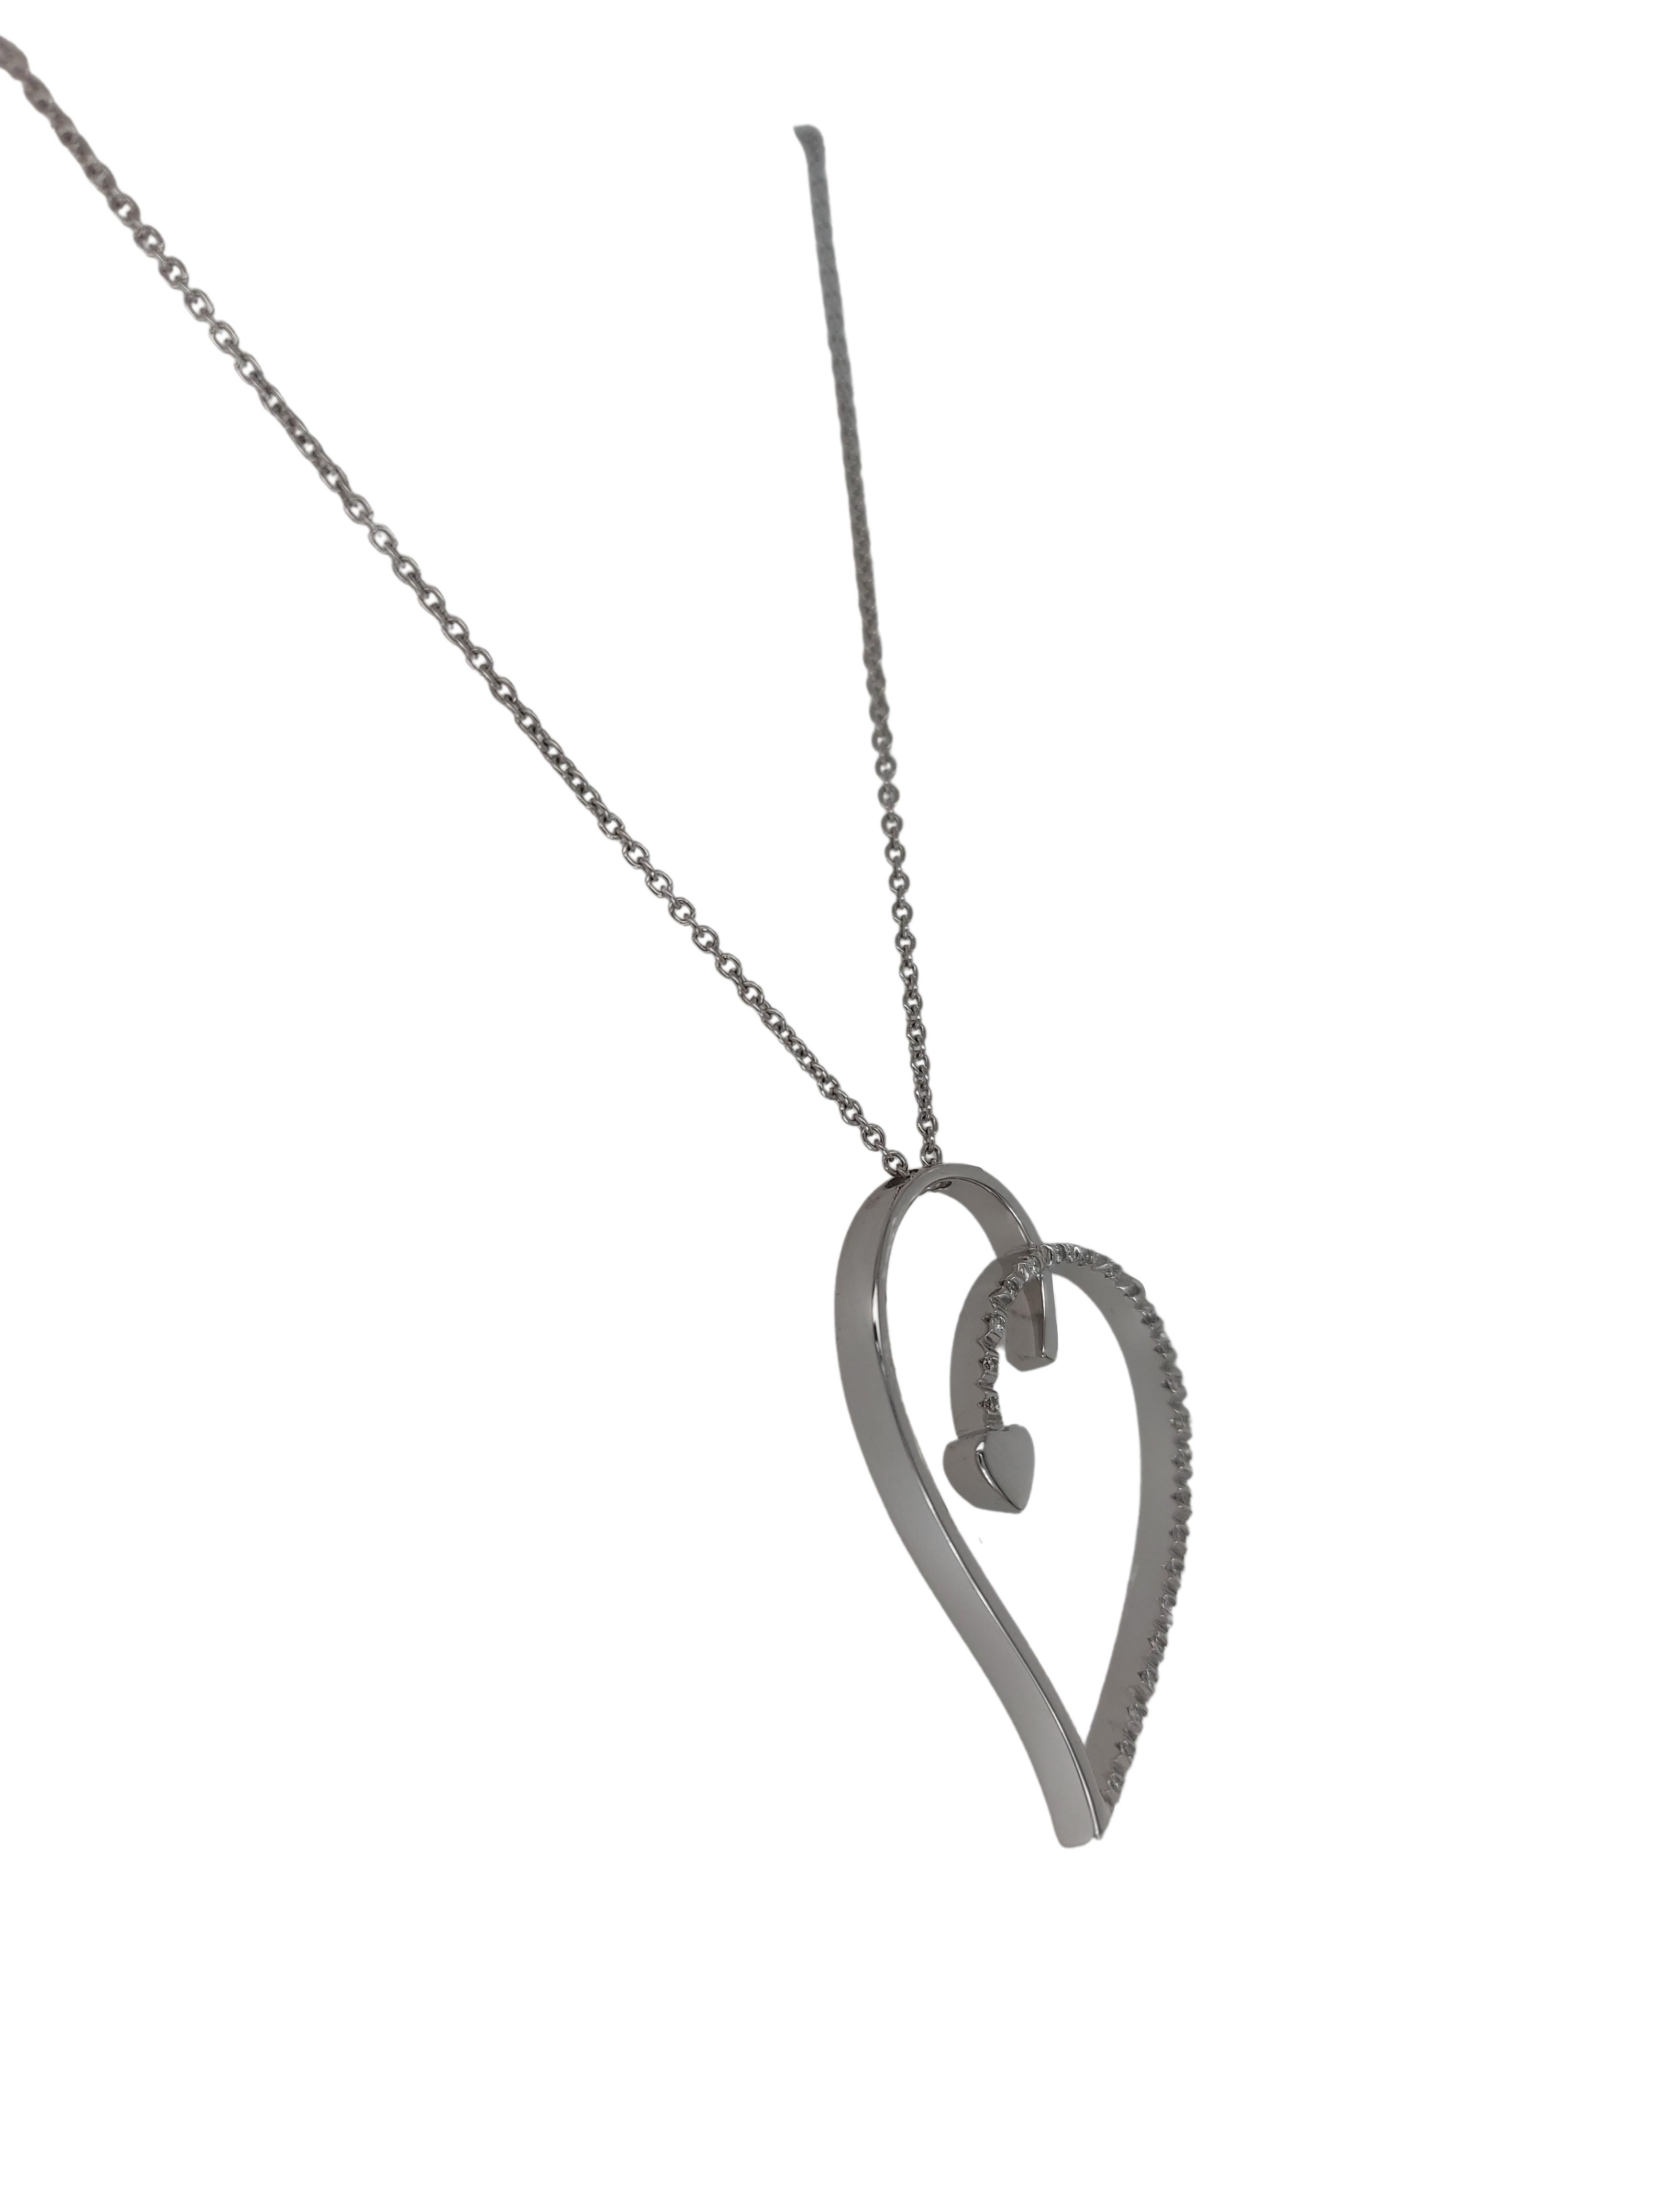 Brilliant Cut 18kt White Gold Kappadue Heart Shaped Necklace with 0.12ct Diamonds For Sale